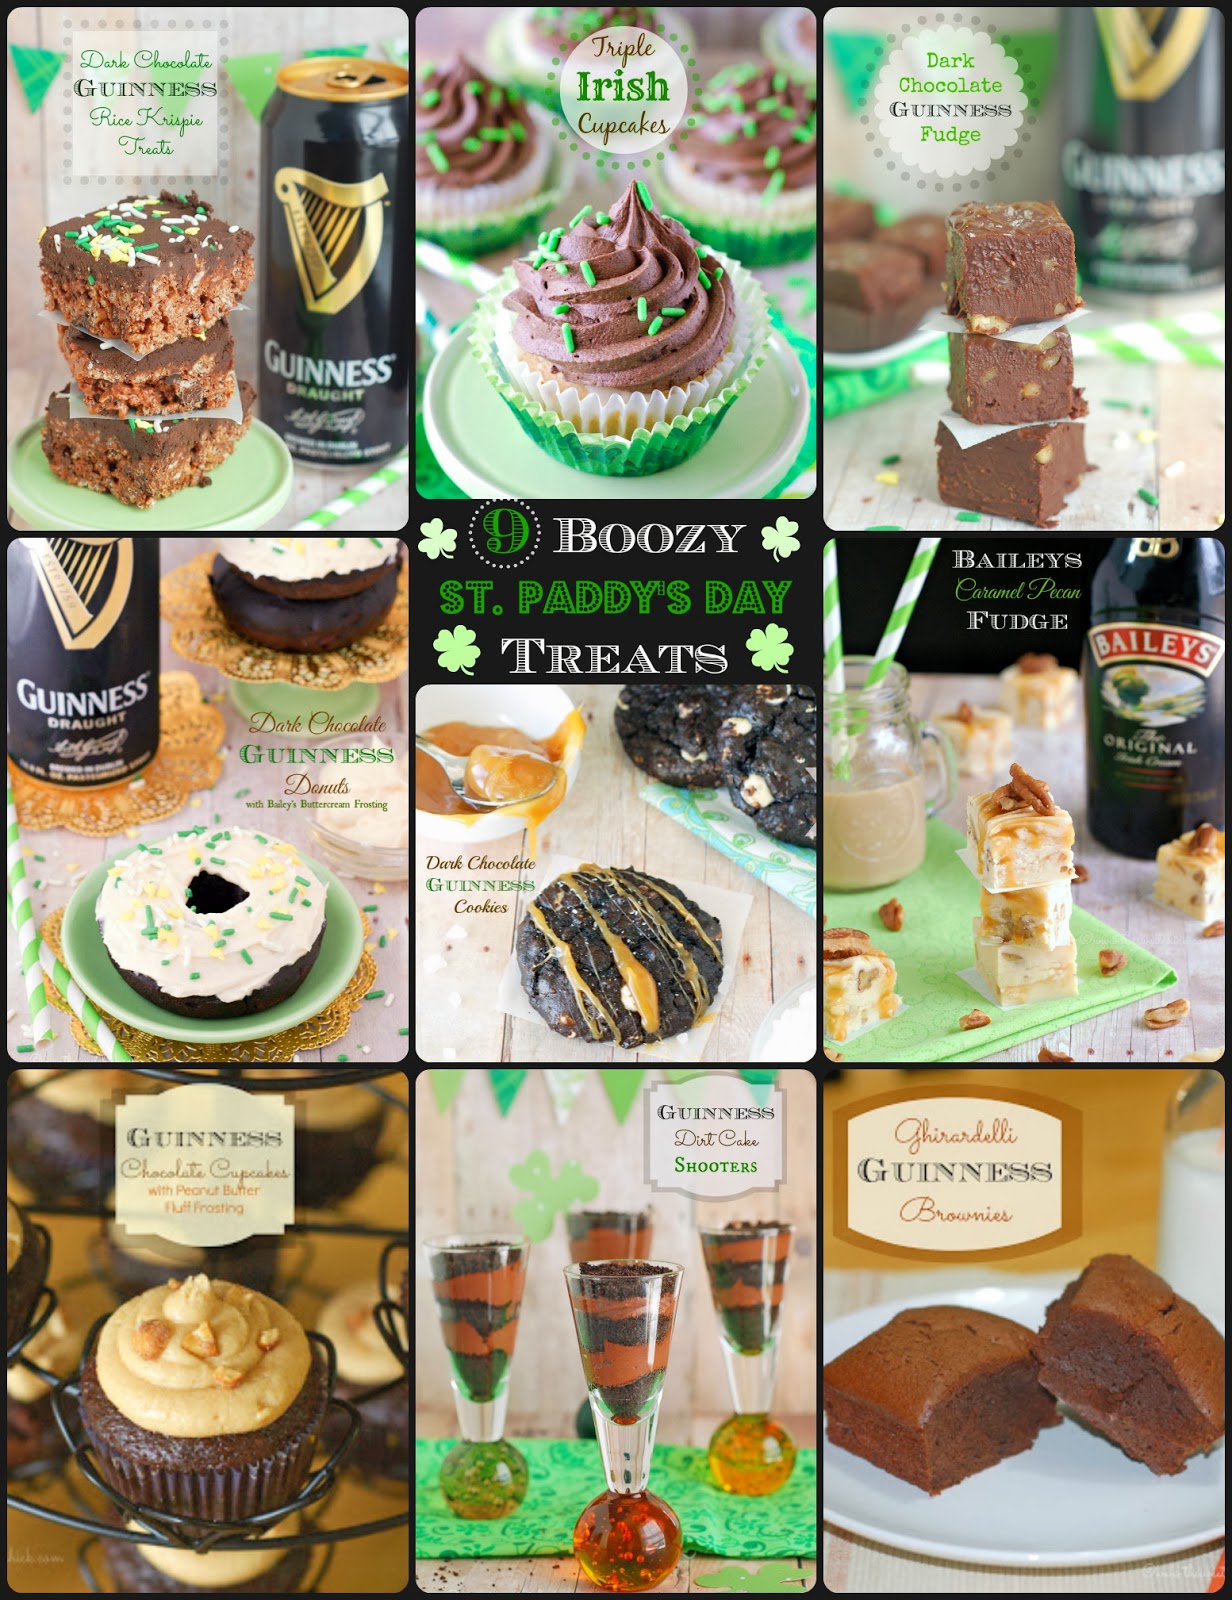 9 Boozy St. Paddy's Day Treats by The Sweet Chick